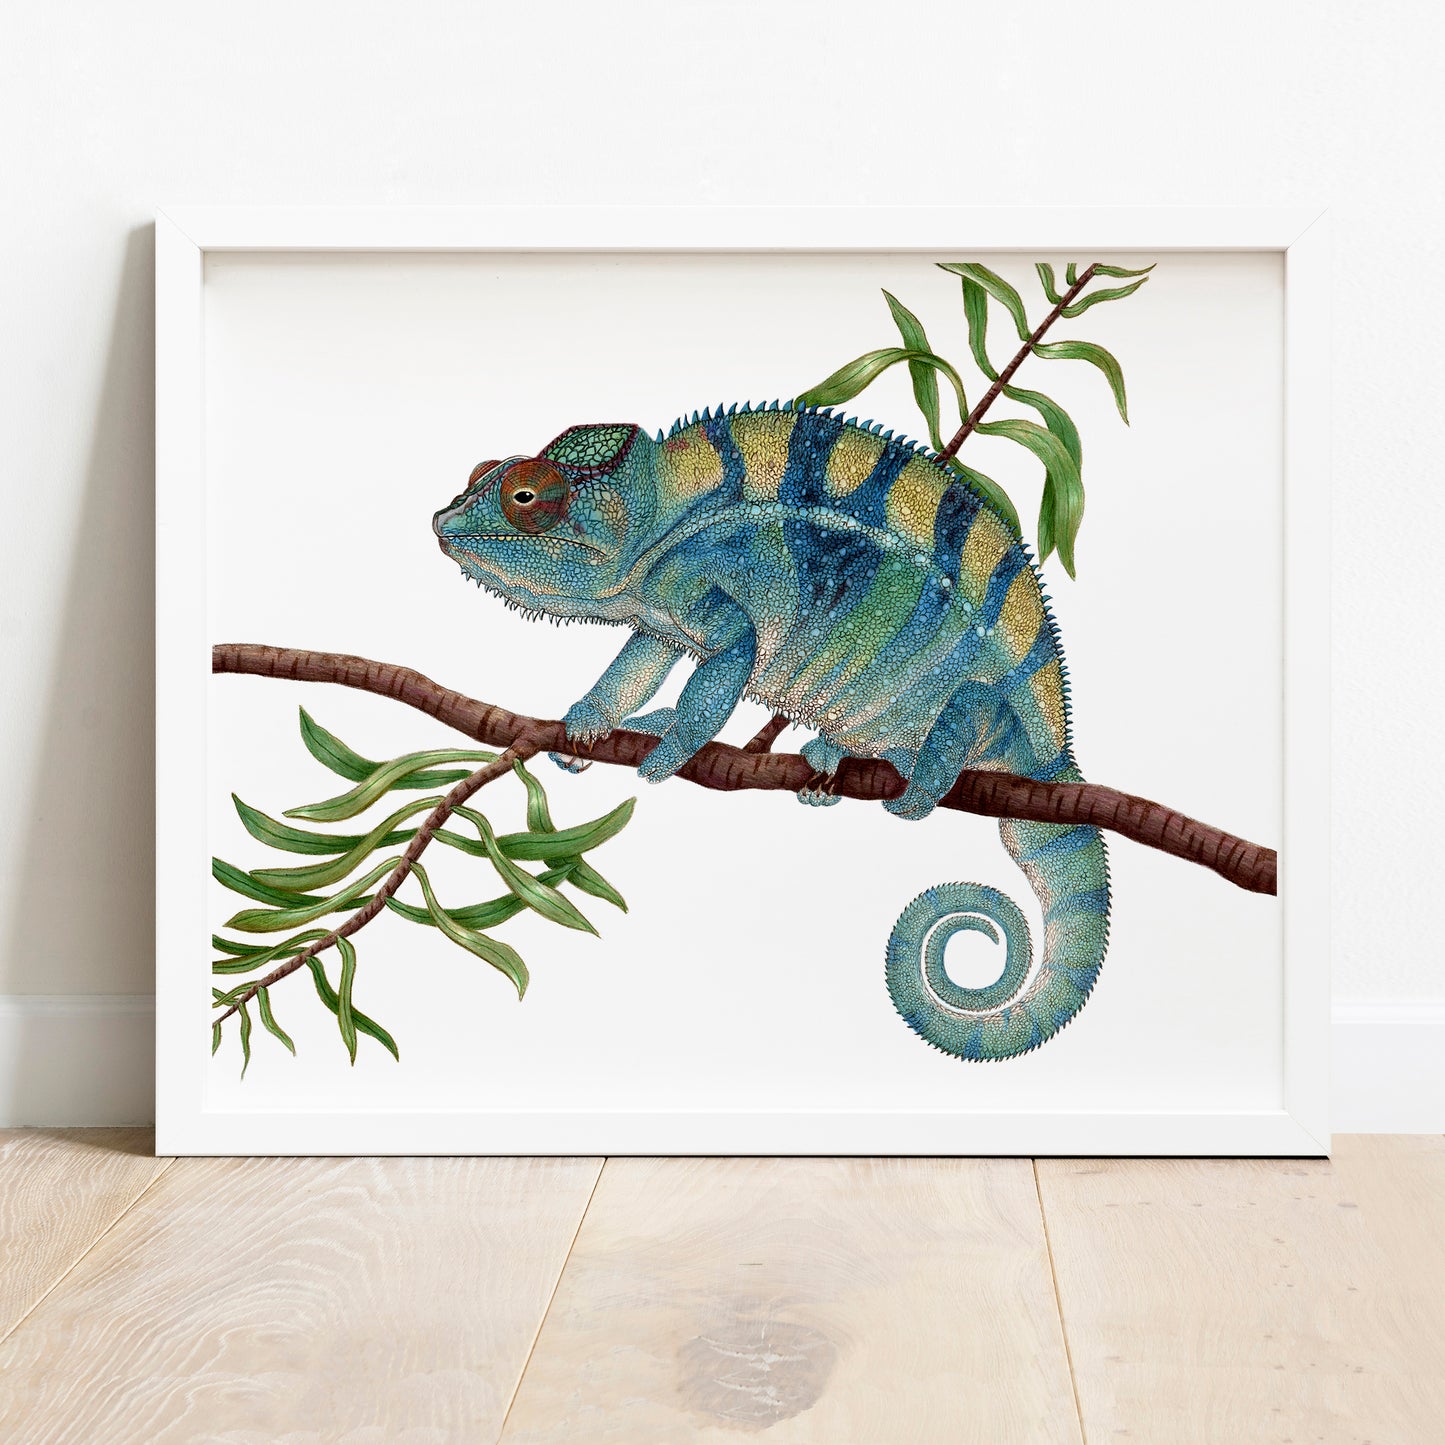 Hand drawn pencil art of panther chameleon by Rachel Diaz-Bastin. Prints available.